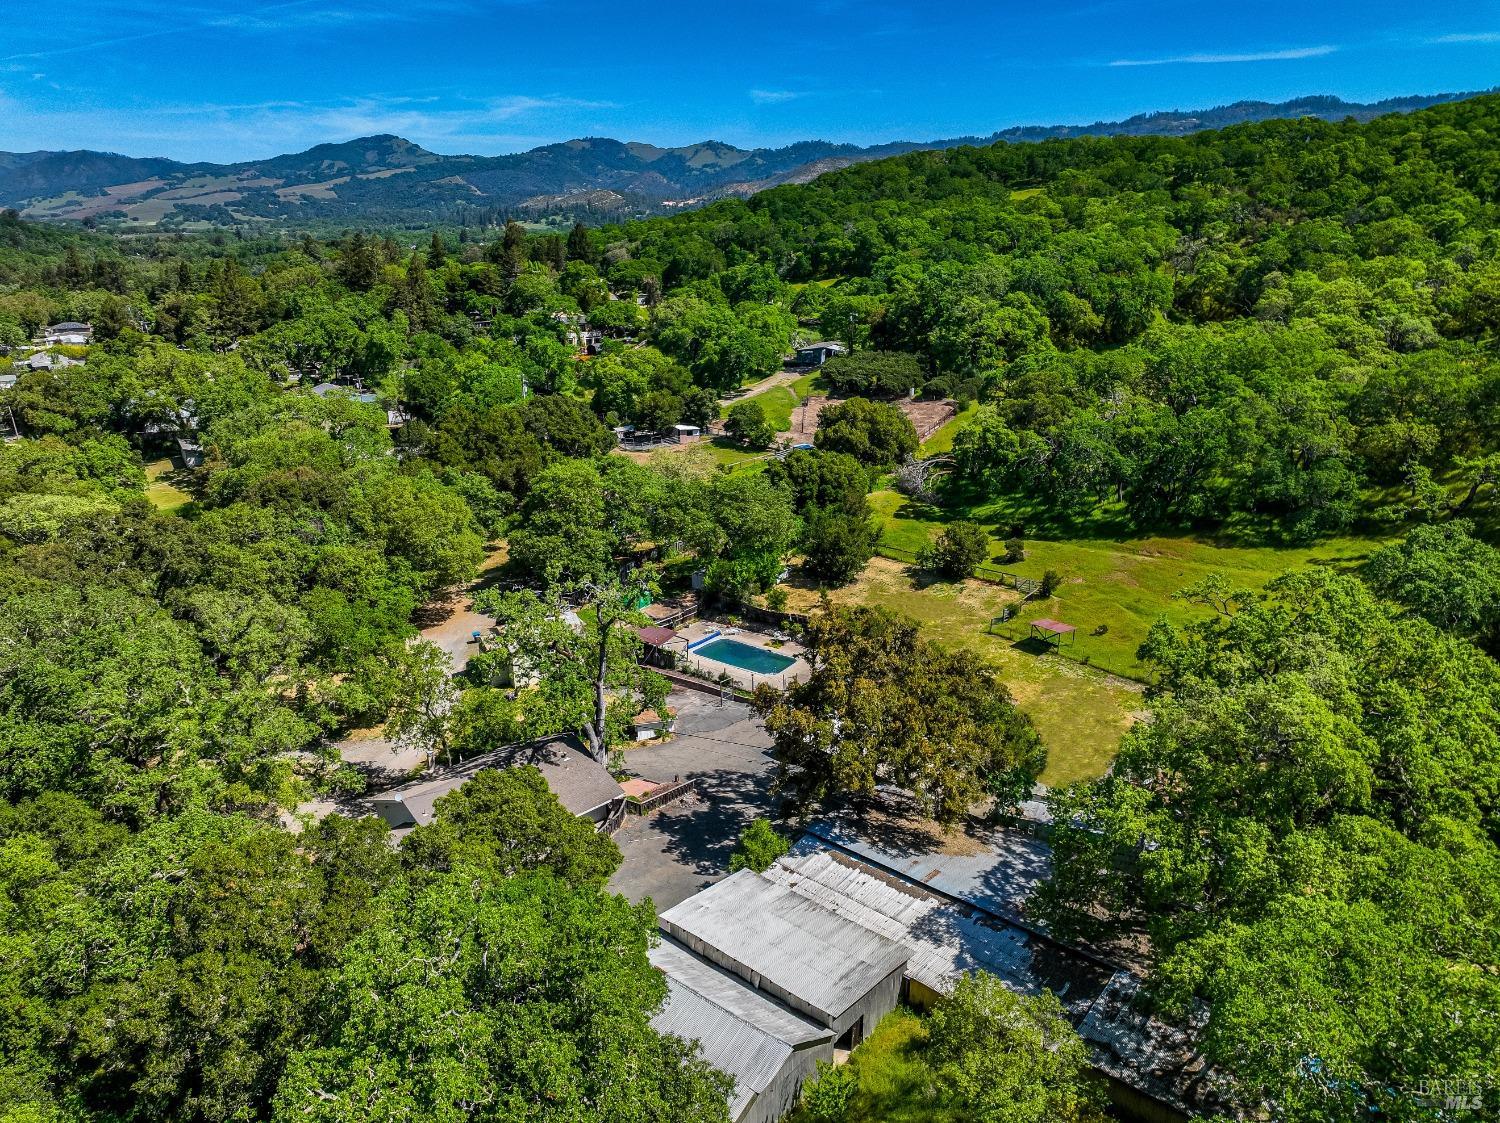 Hidden acreage in downtown Glen Ellen with multiple parcels and homes. Adjoins Sonoma Valley Regional Park, public water, annexed to sewer district. Around the corner from downtown, incredible views.